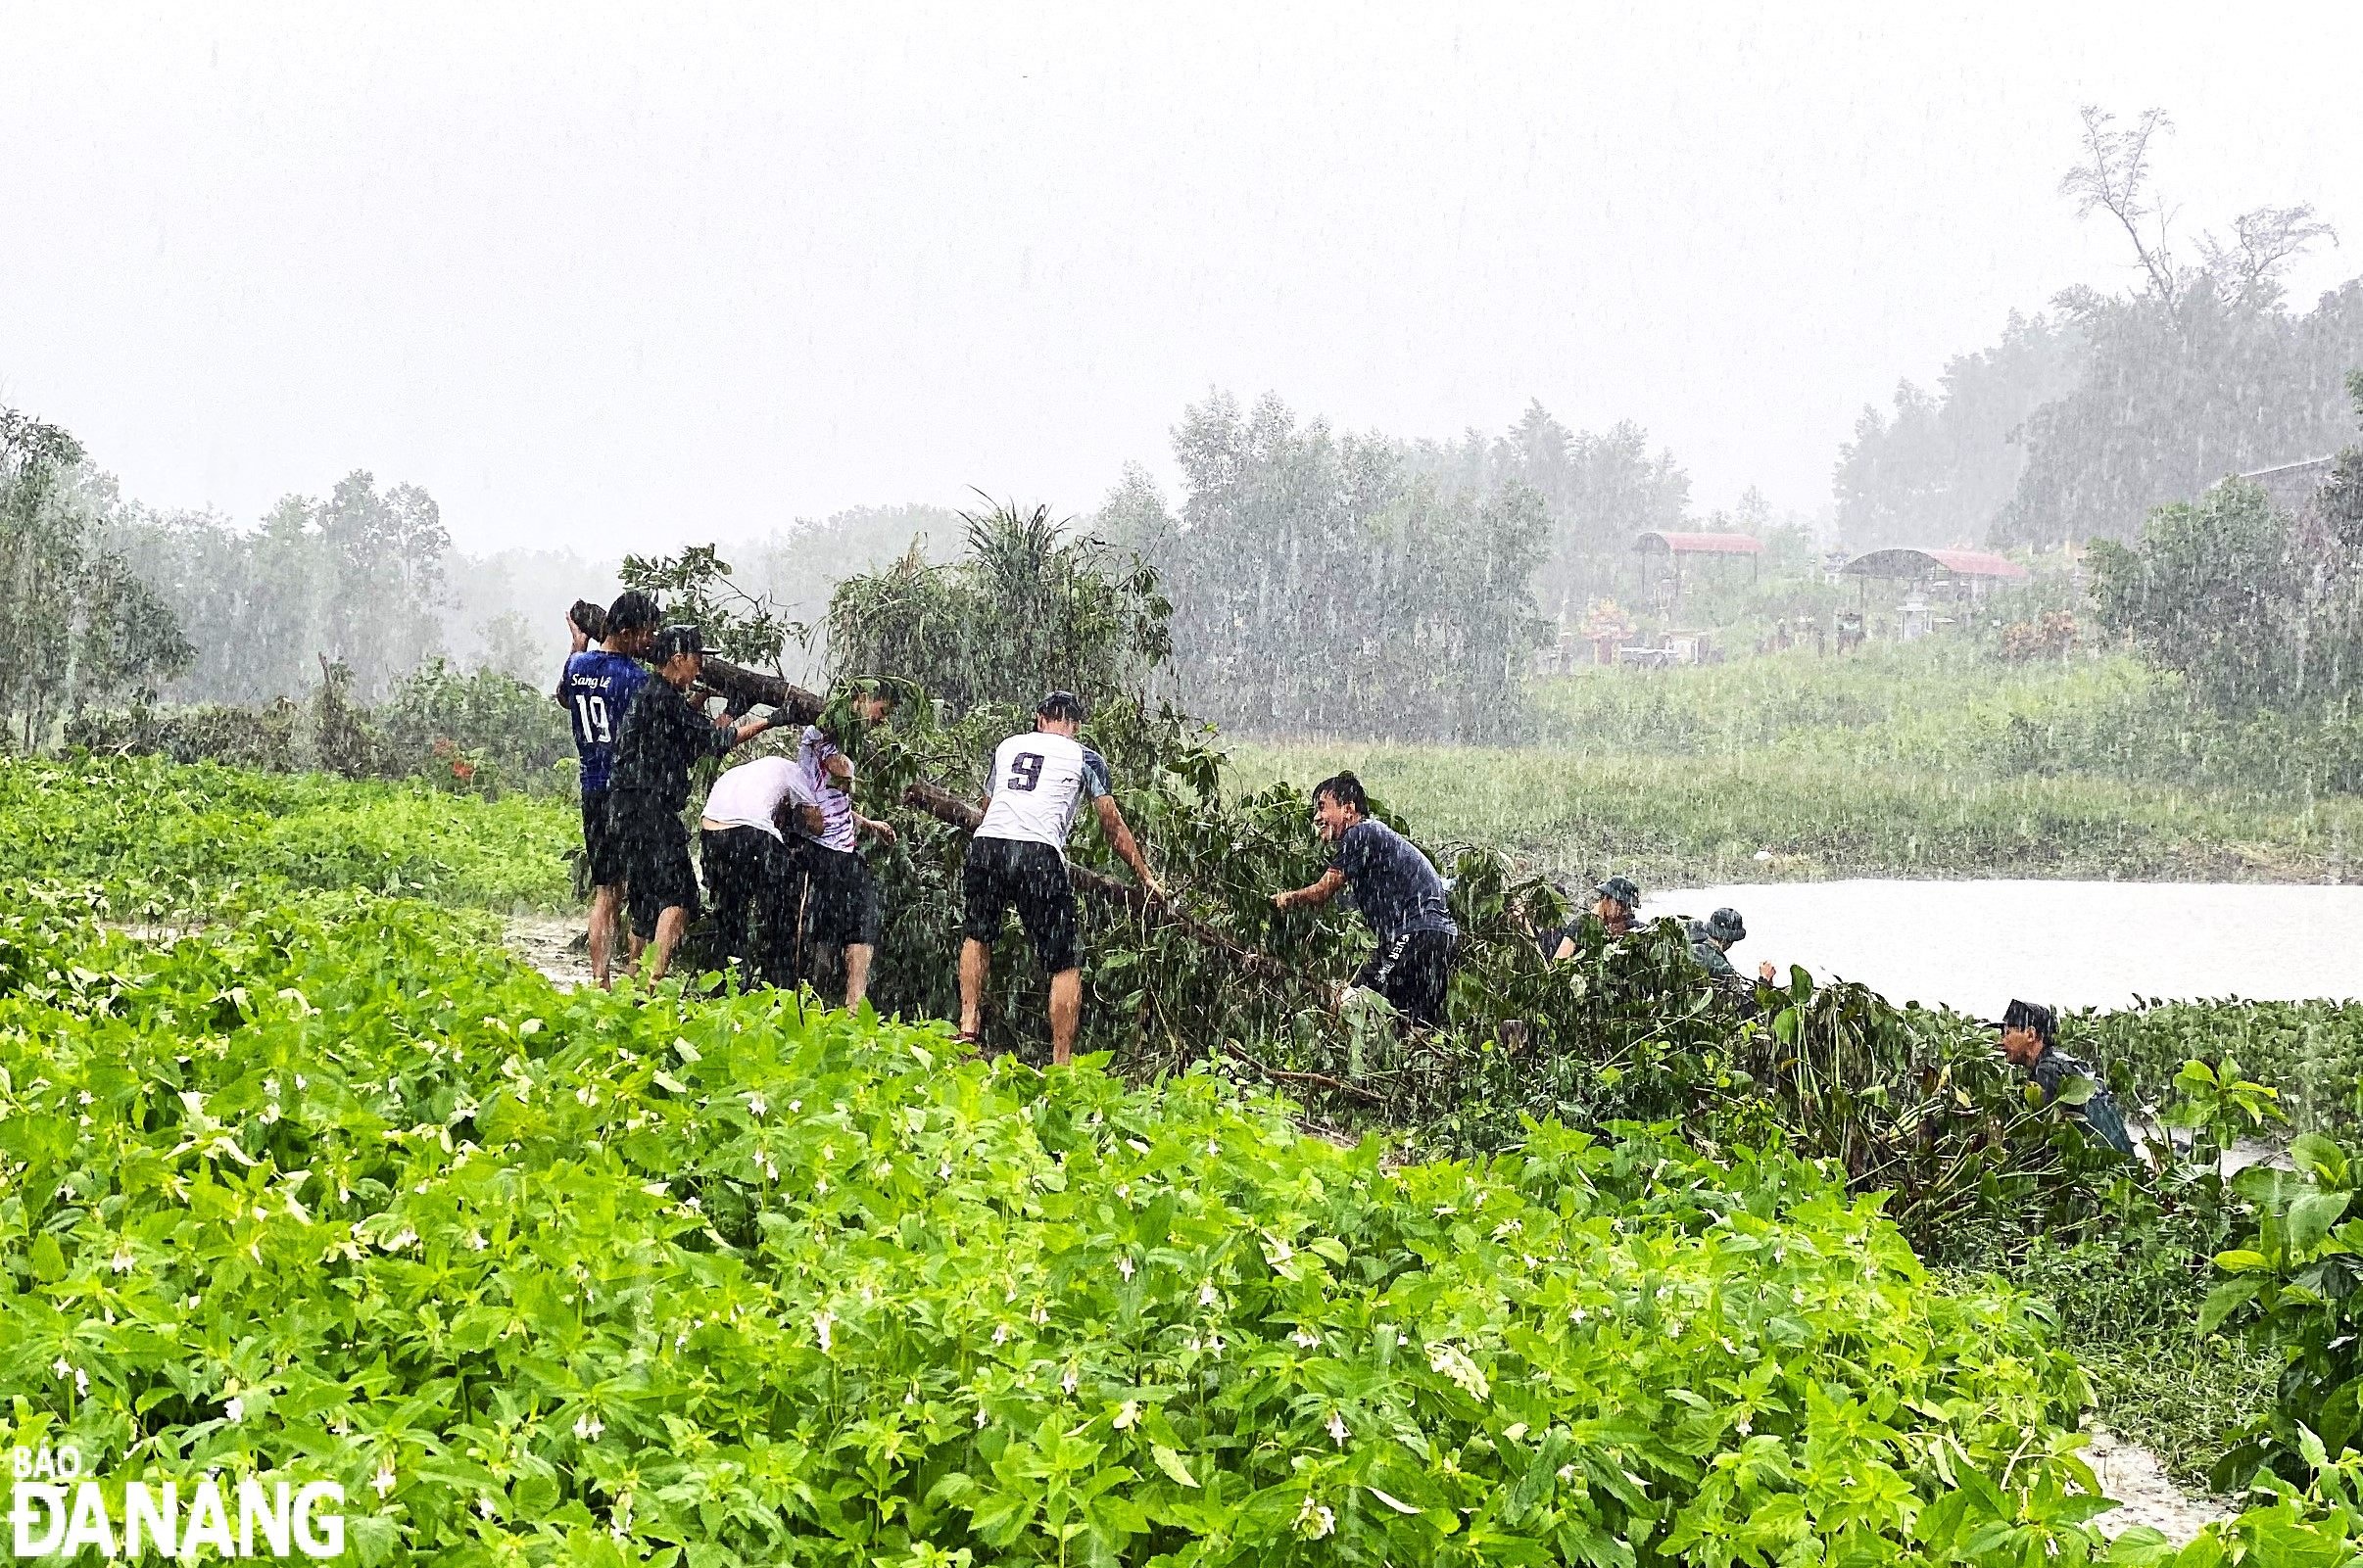 Despite heavy rain on the afternoon of June 23, youth union members and young people still tried to collect water hyacinths.